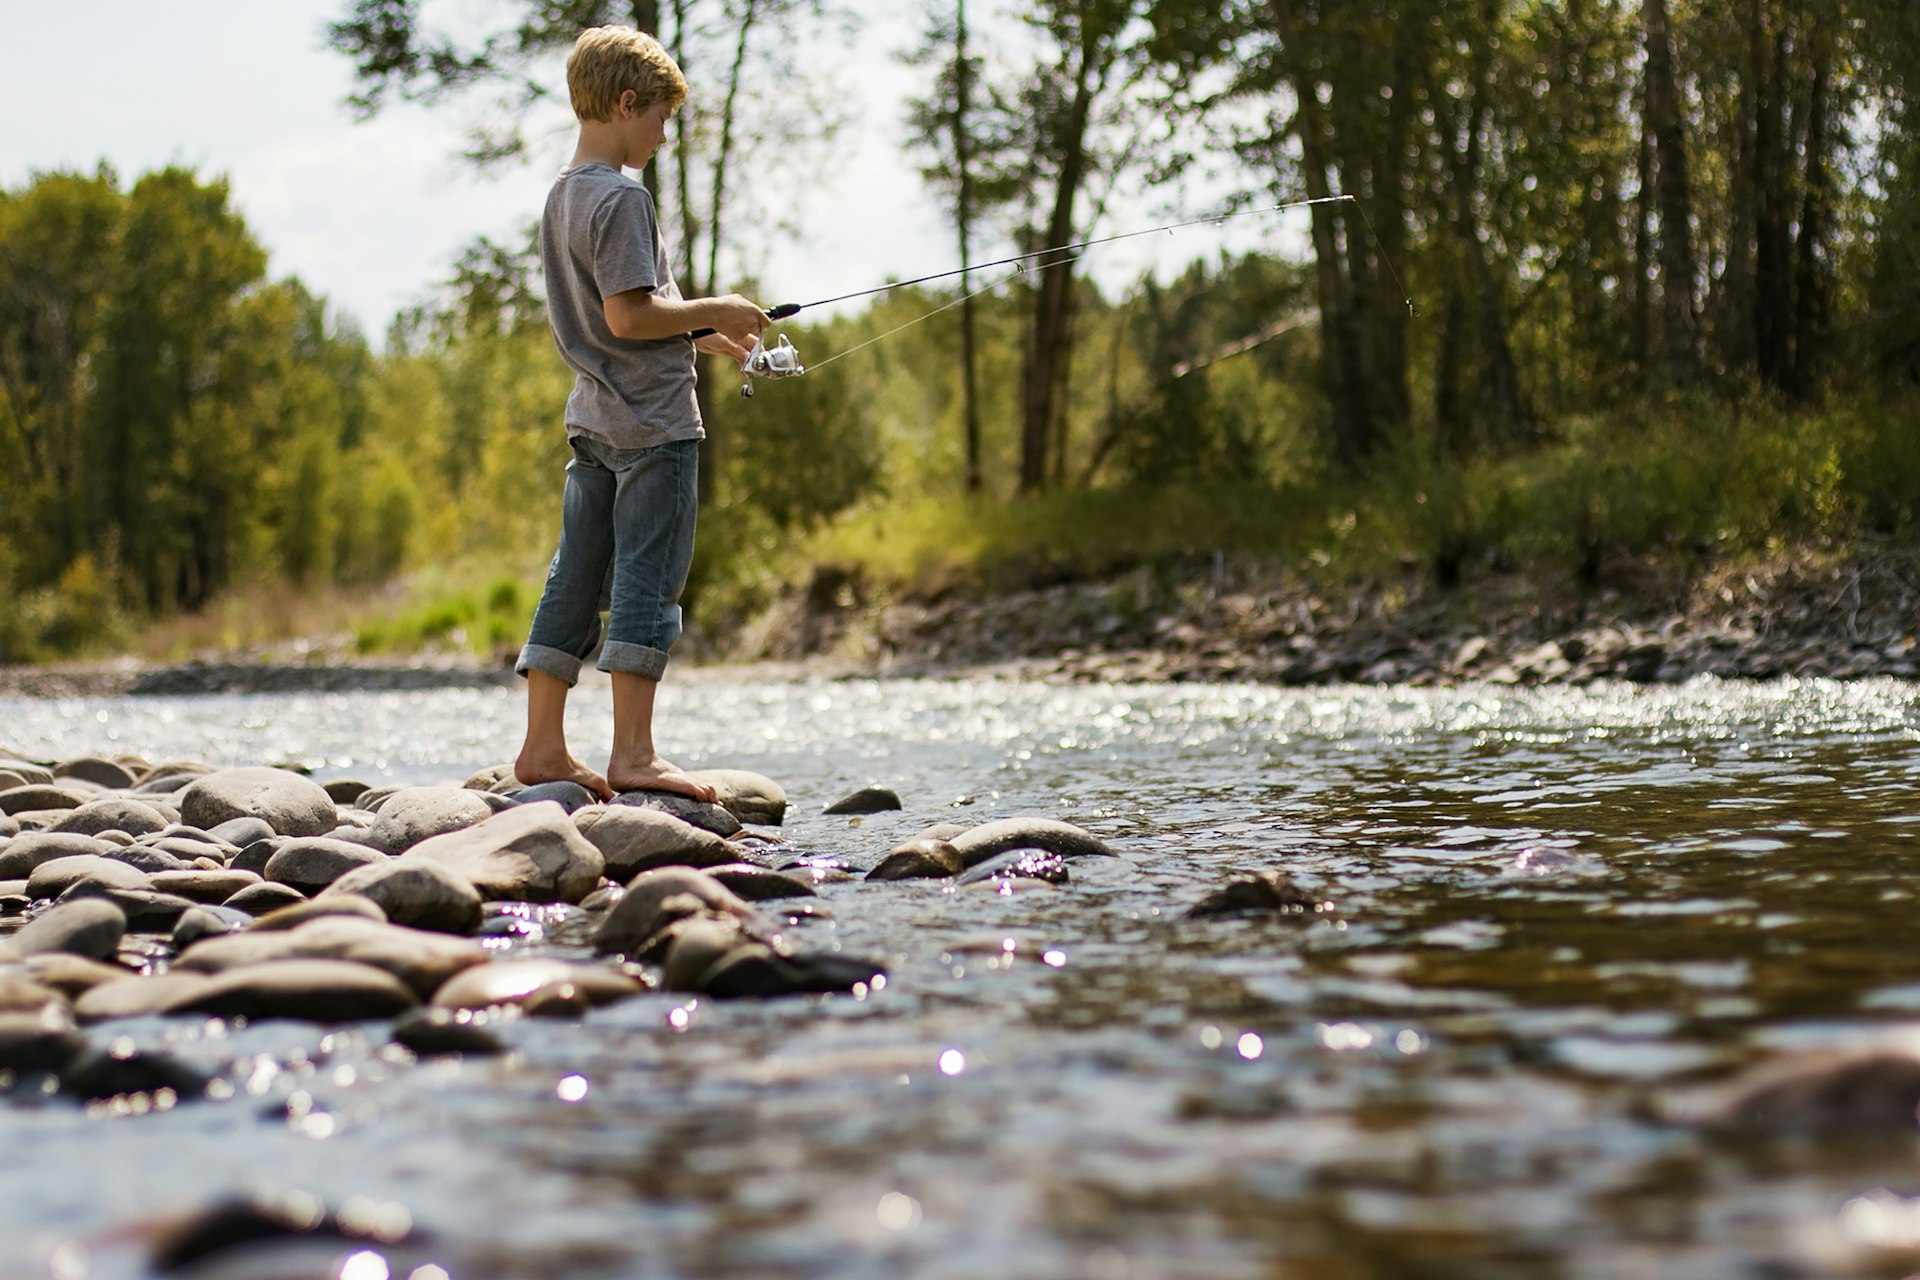 A young boy fishes in a river near Bozeman, Montana in the afternoon sun